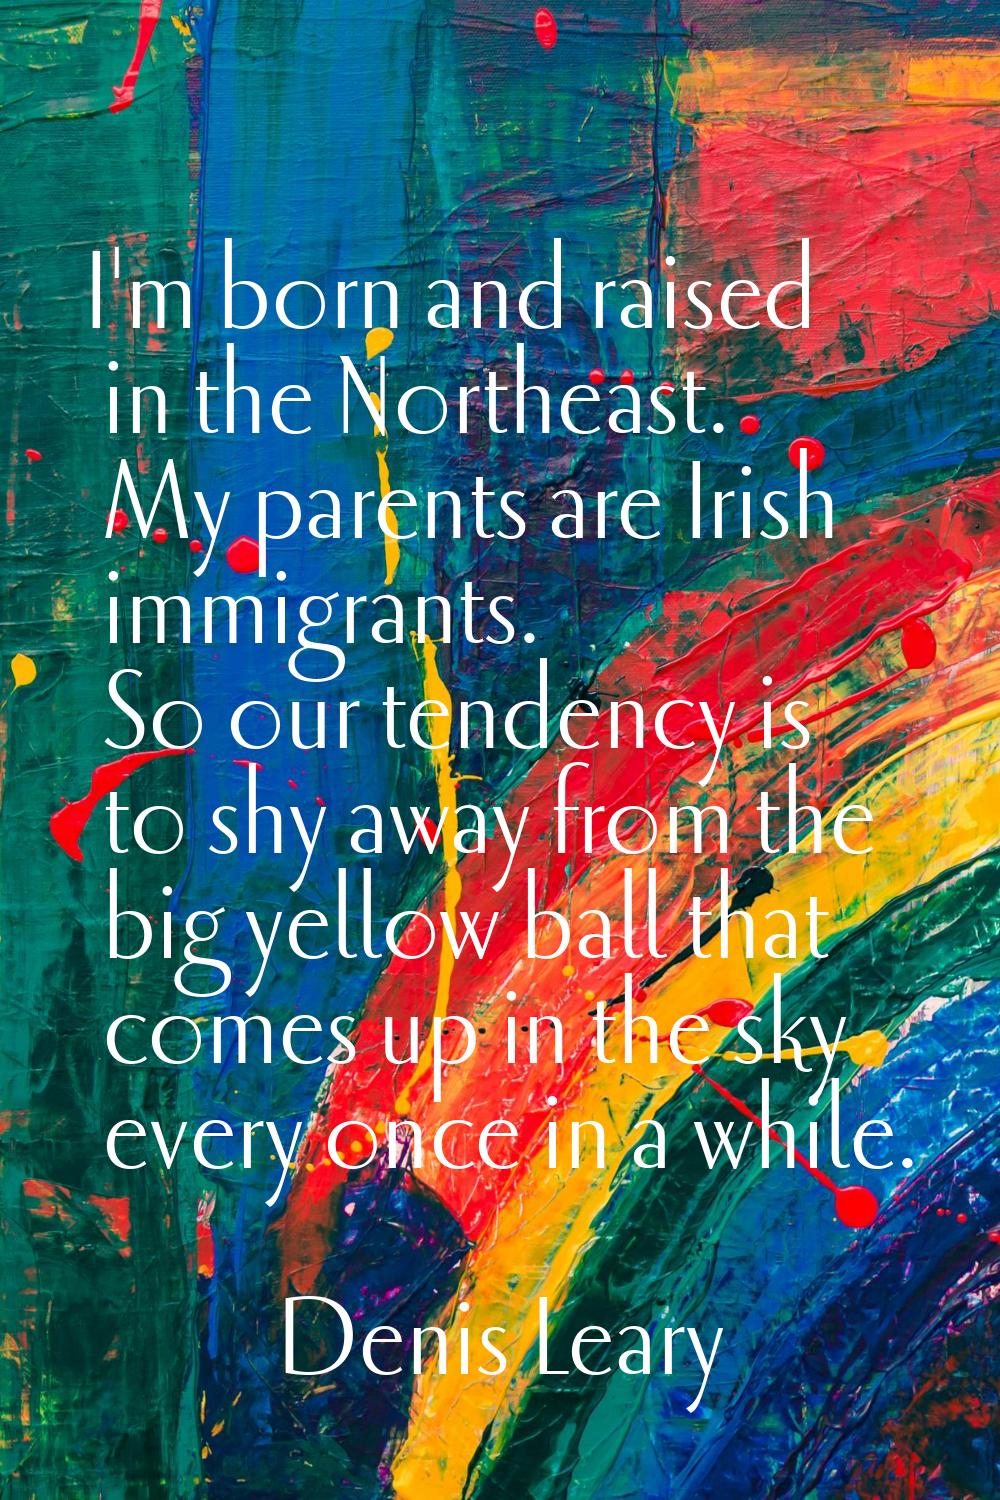 I'm born and raised in the Northeast. My parents are Irish immigrants. So our tendency is to shy aw